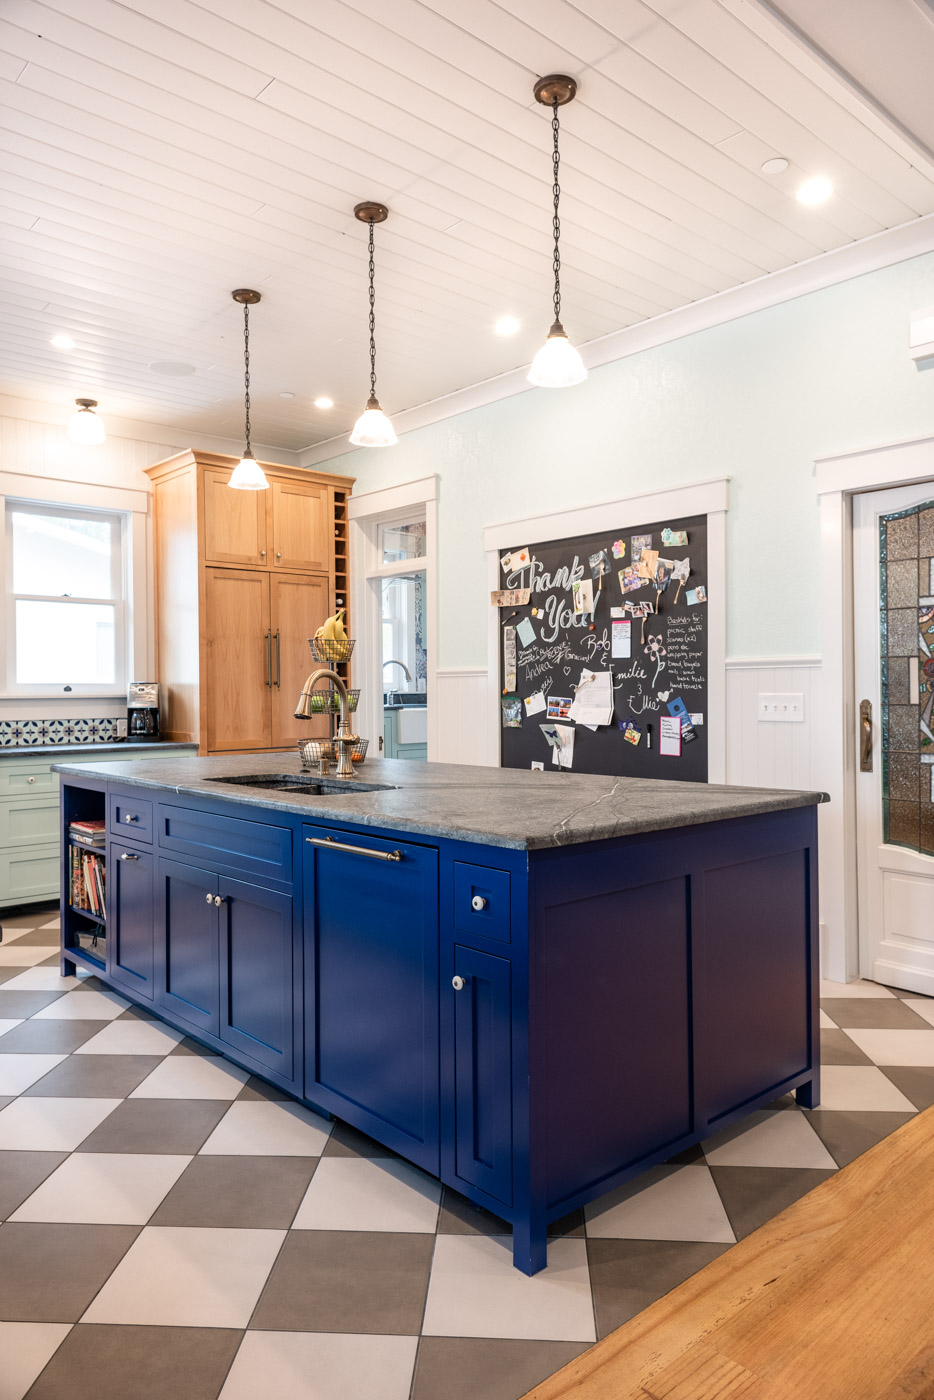 Handcrafted Kitchen in Dusty Blue and Wood - Town & Country Living